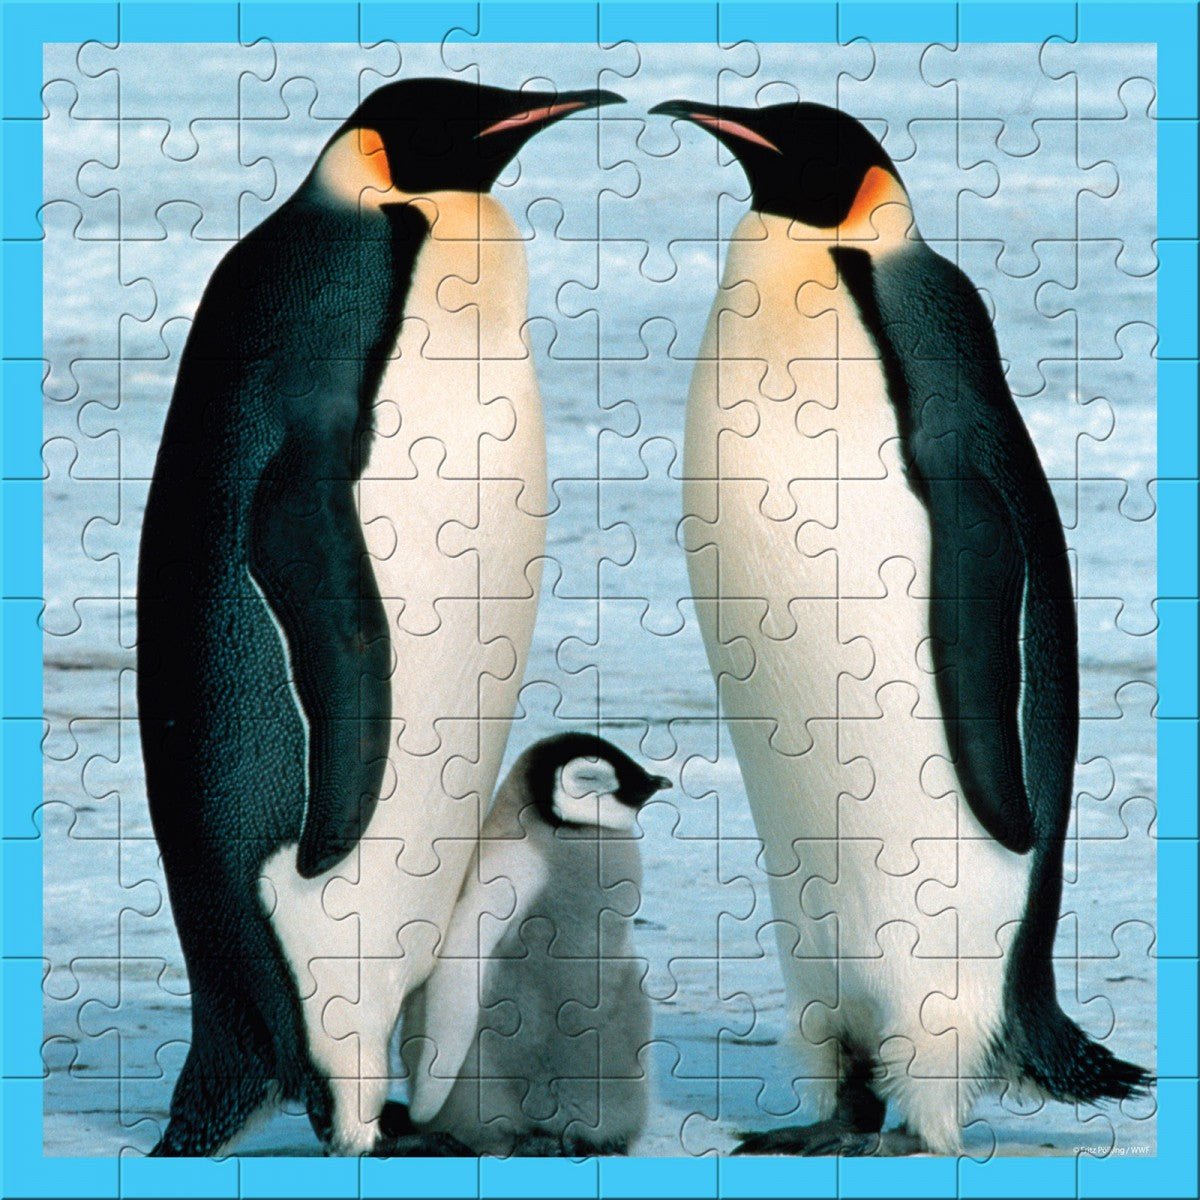 WWFWWF Penguin 100 Piece Puzzle #same day gift delivery melbourne#